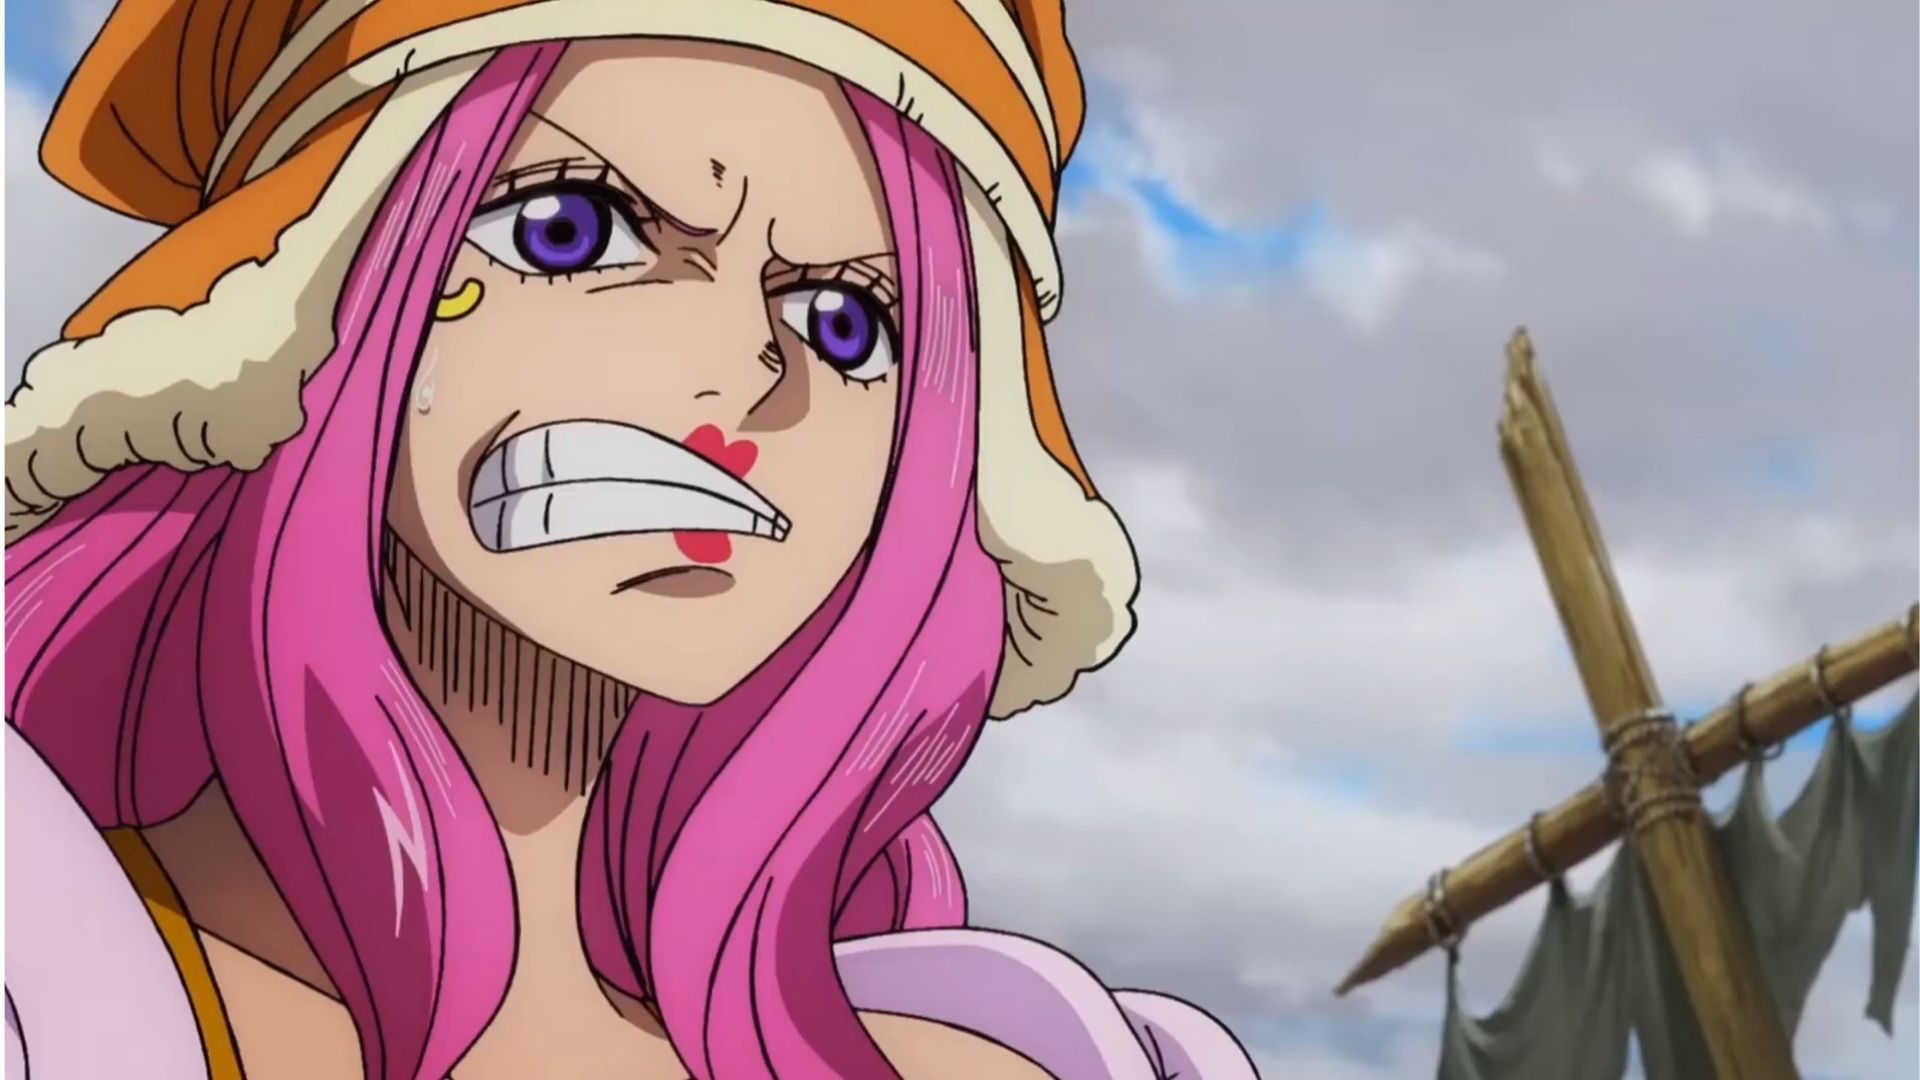 Bonney as seen in One Piece anime (Image via Toei Animation)